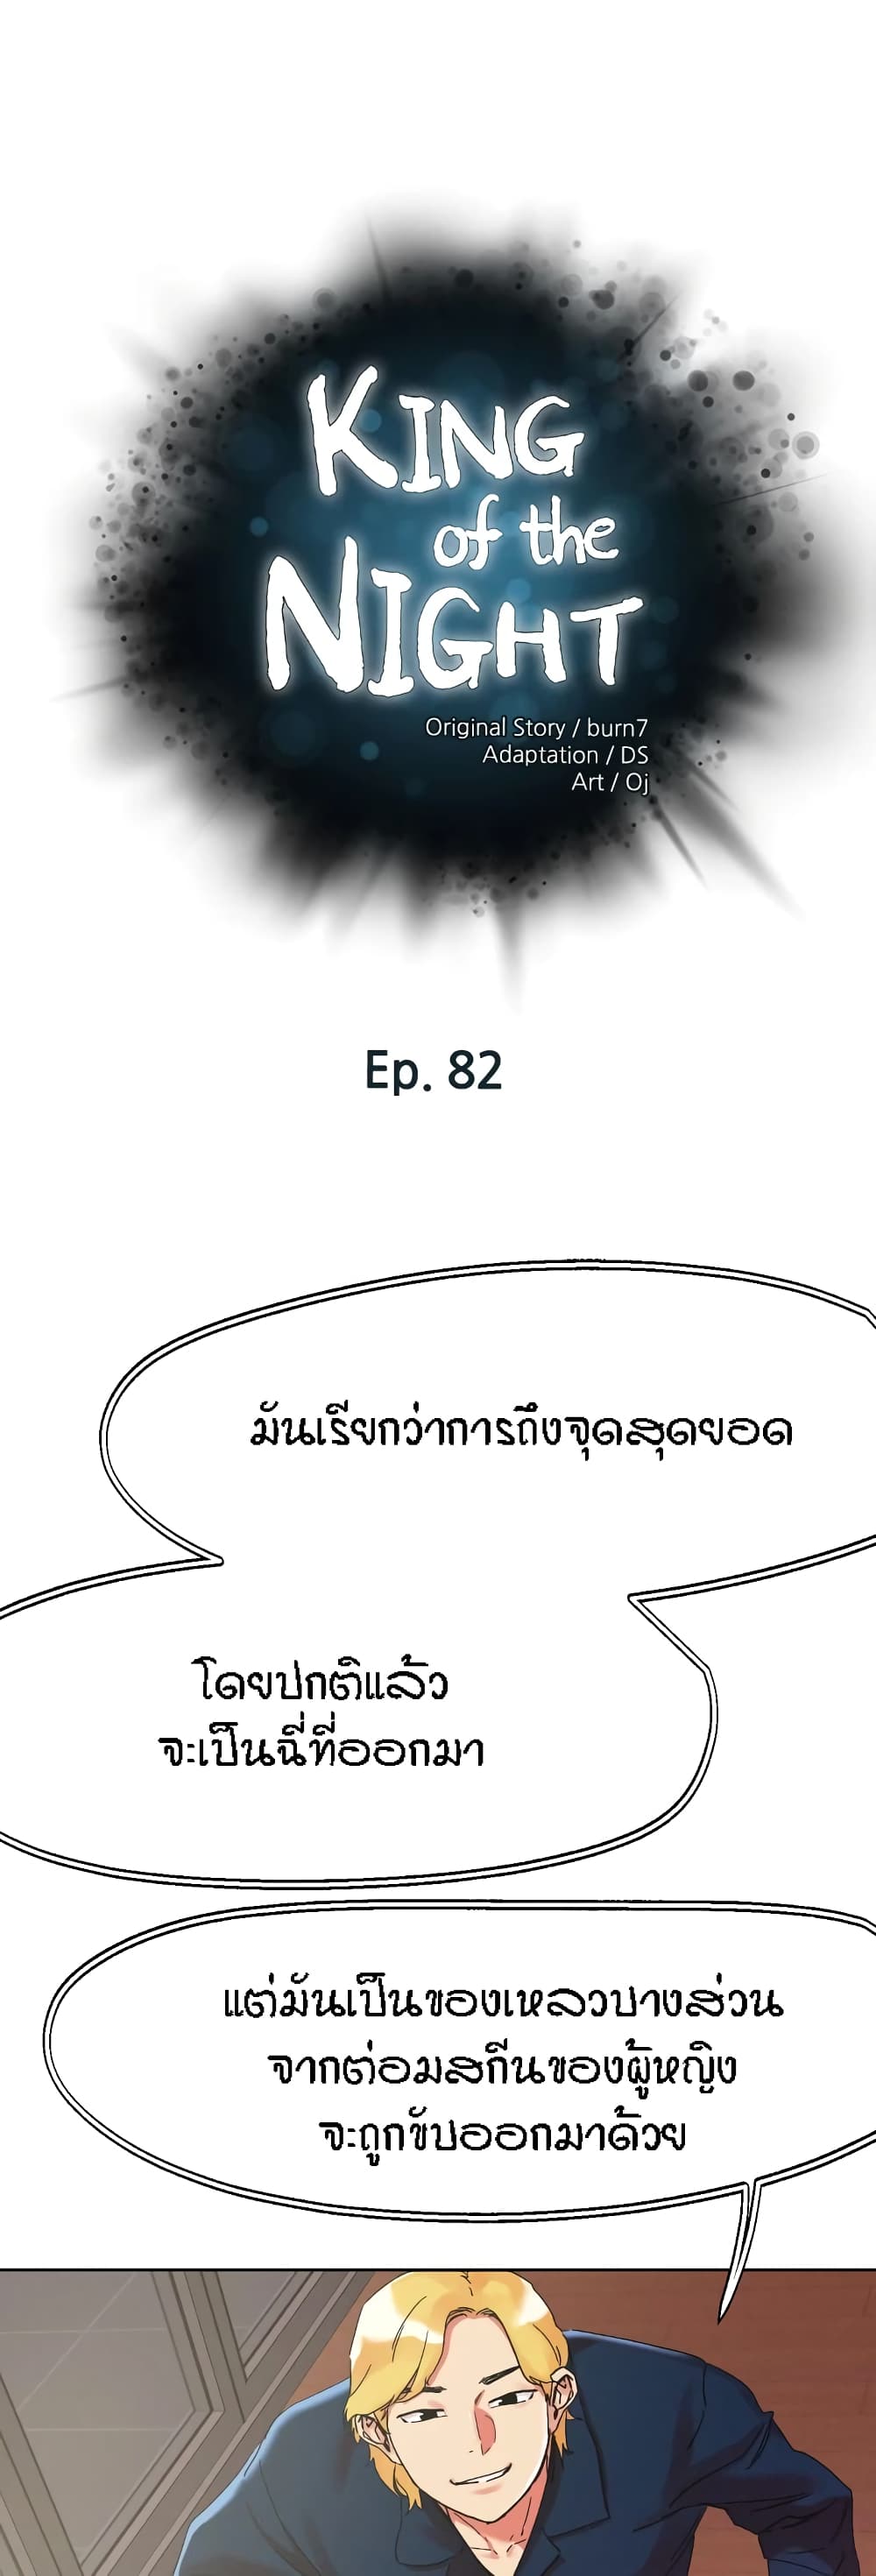 King of the Night 82 (1)